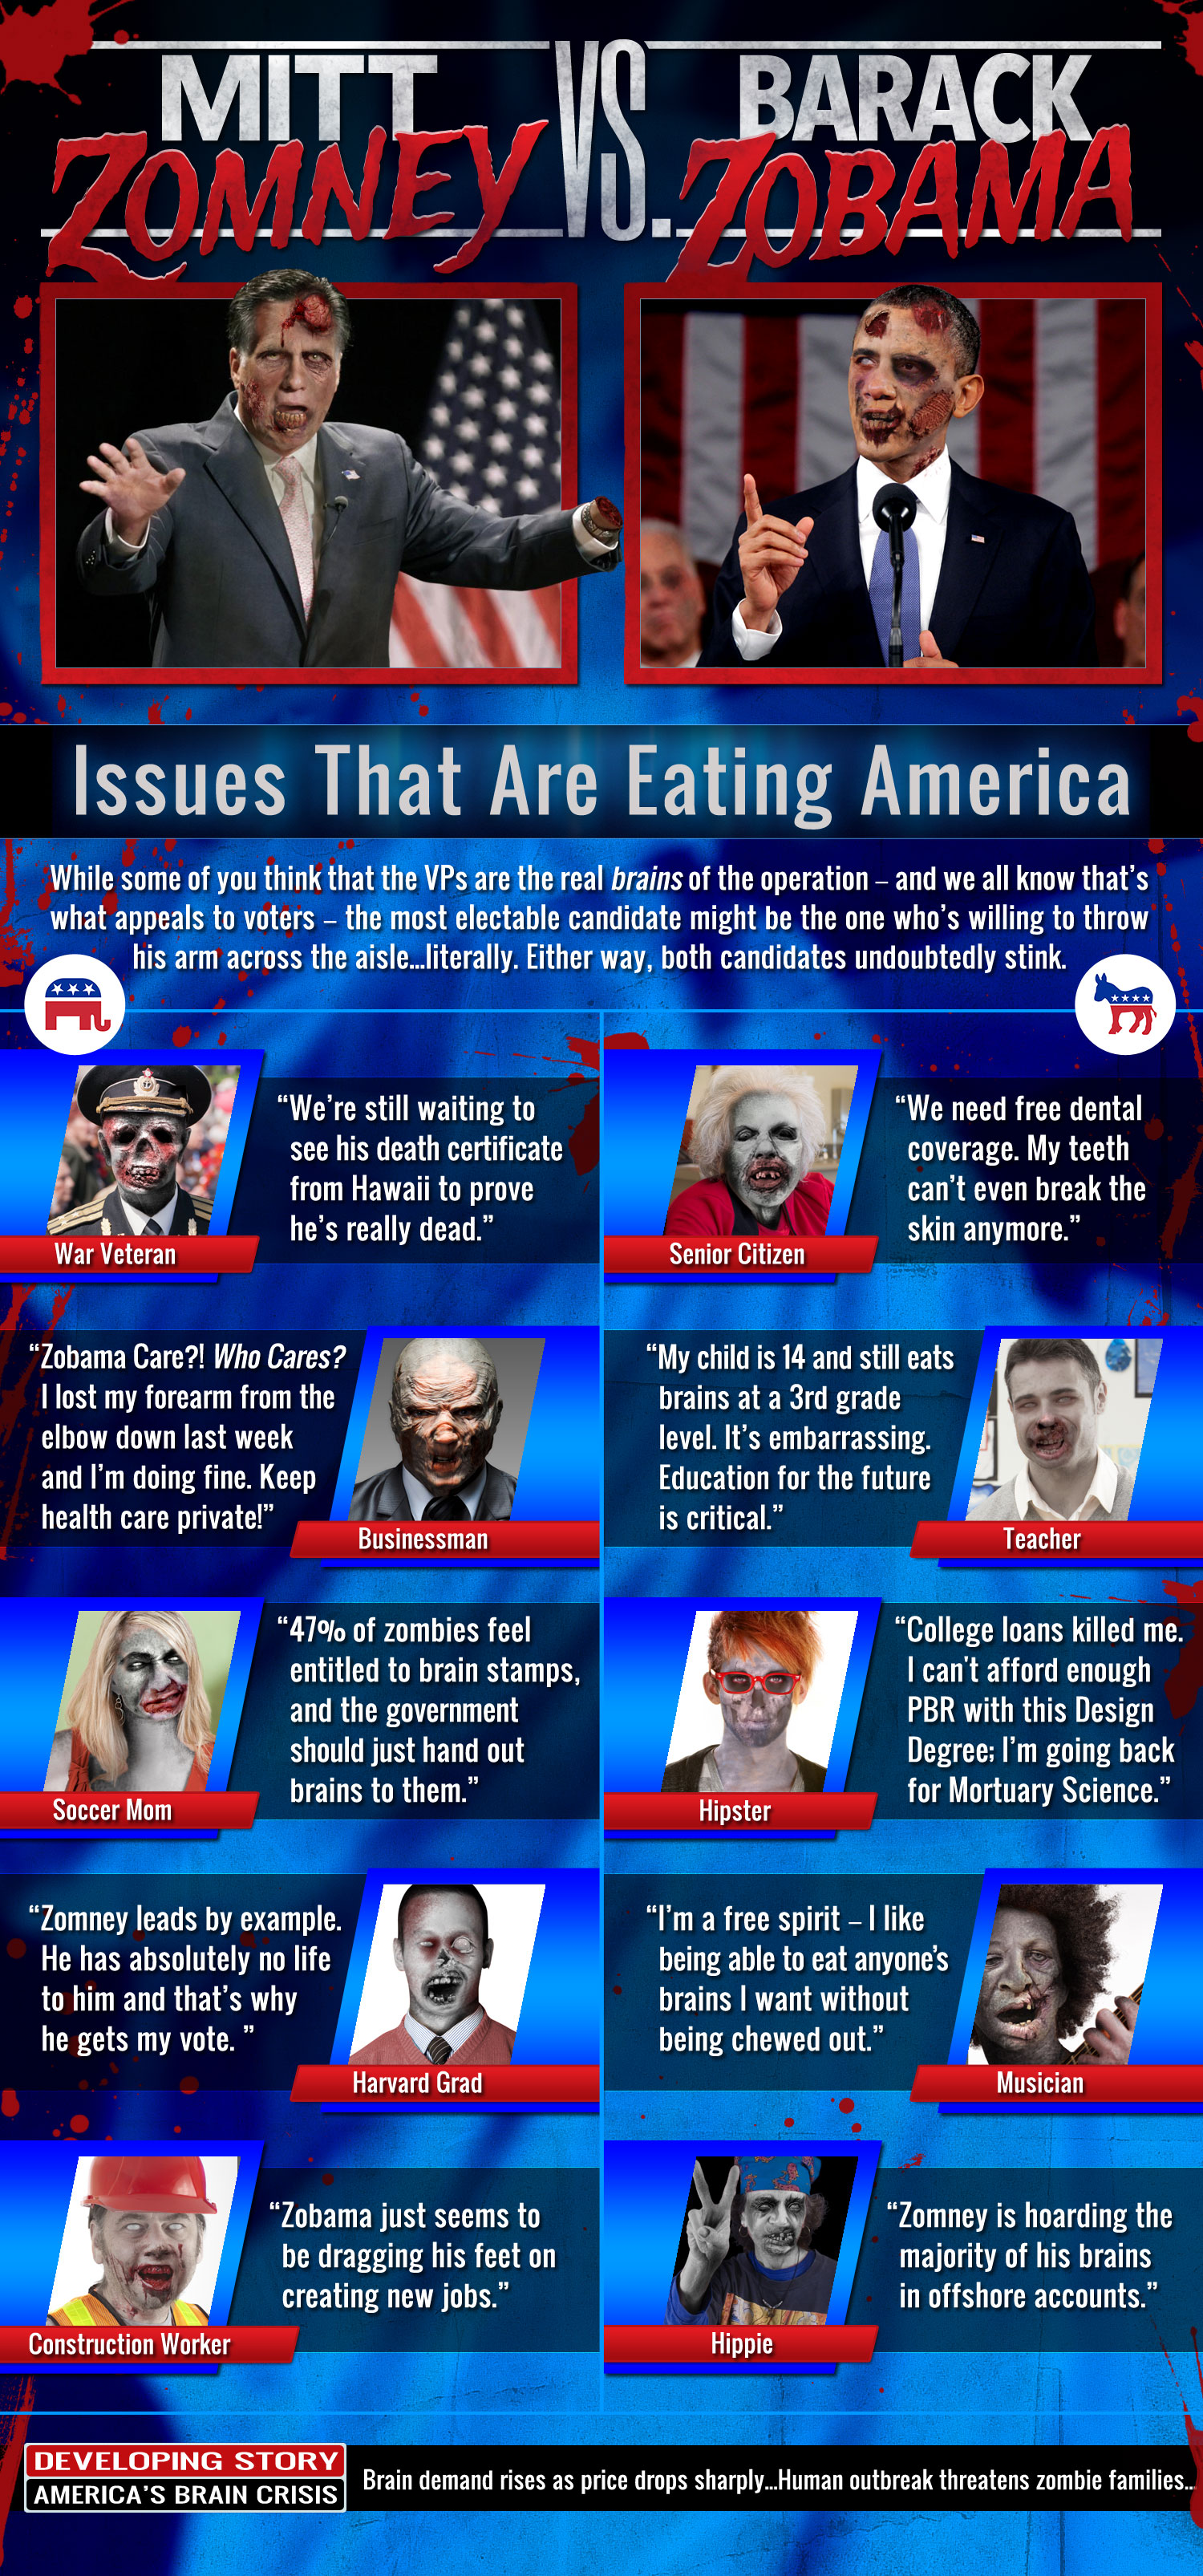 HalloweenCostumes.com: Issues That Are Eating America